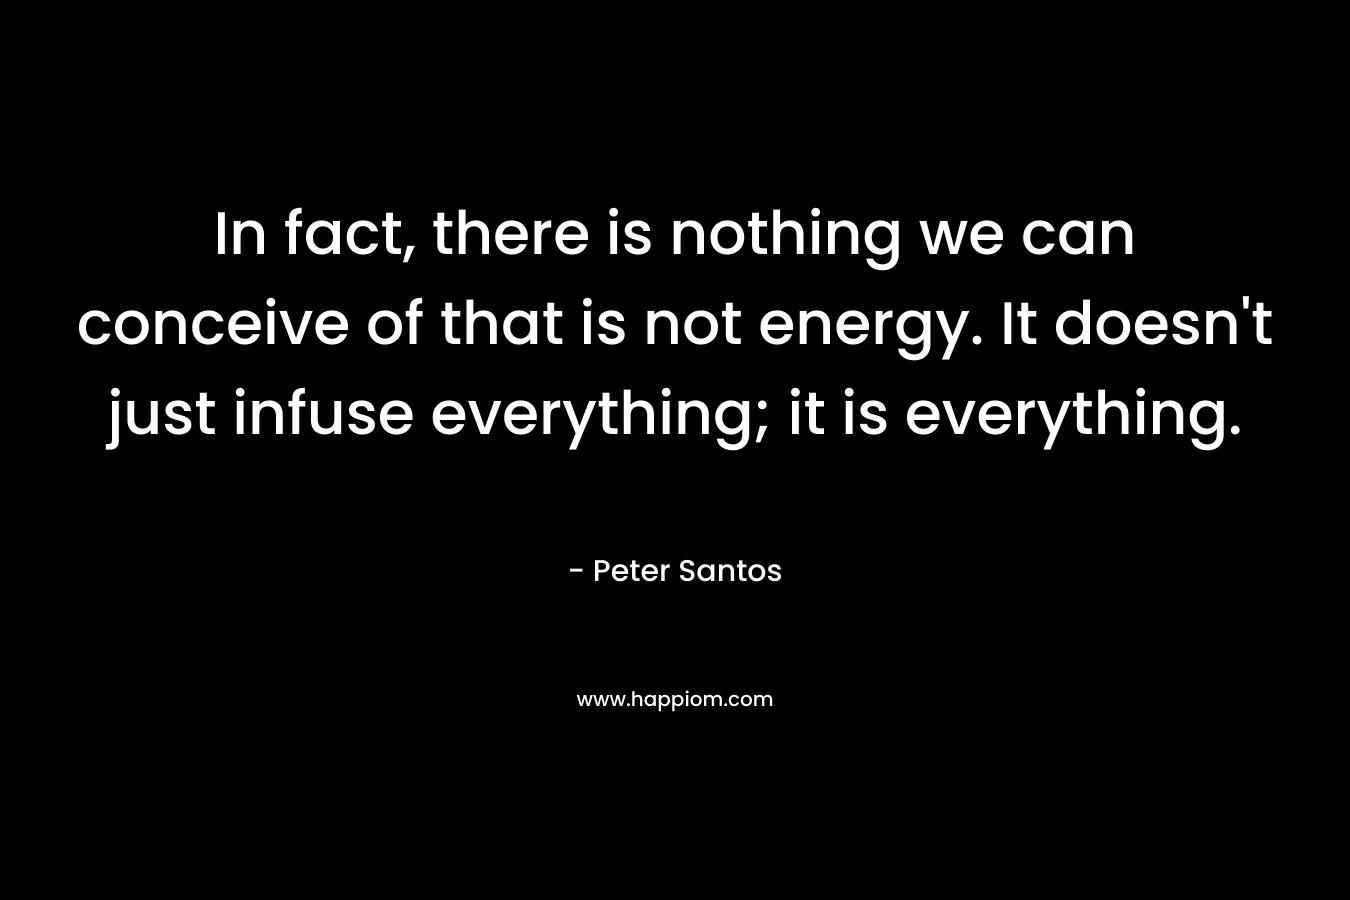 In fact, there is nothing we can conceive of that is not energy. It doesn’t just infuse everything; it is everything. – Peter Santos